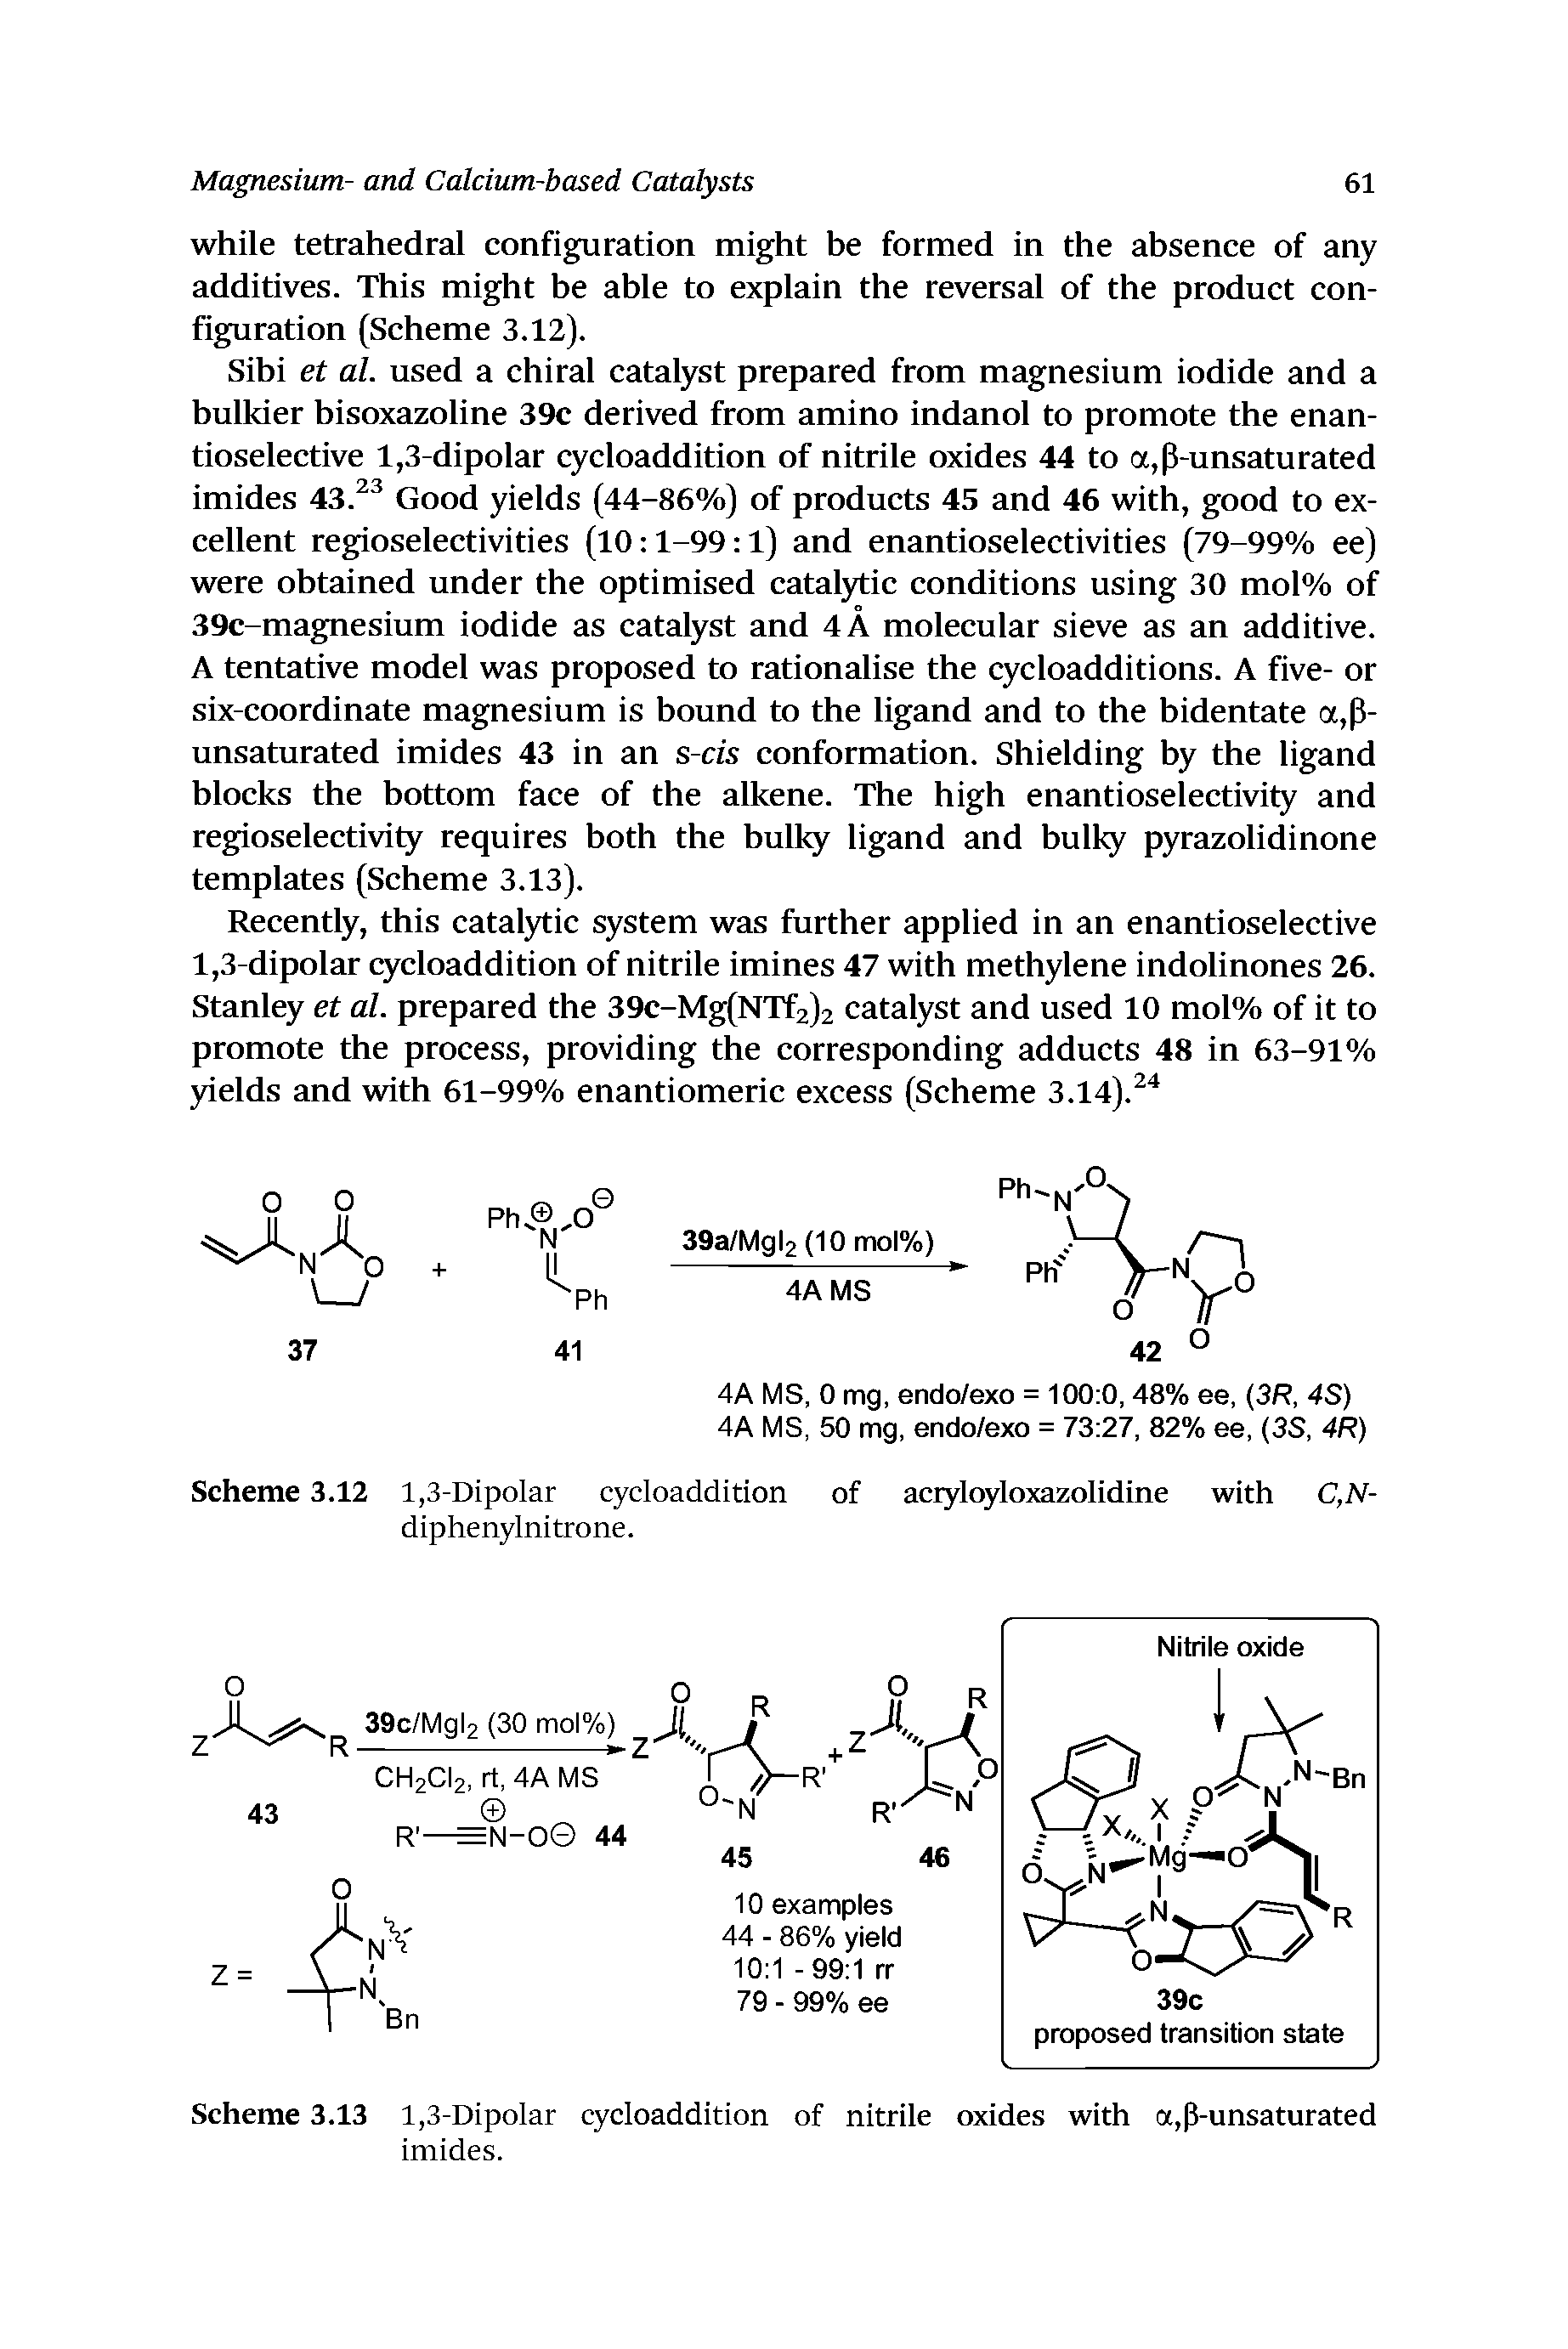 Scheme 3.13 1,3-Dipolar cycloaddition of nitrile oxides with a,p-unsaturated imides.